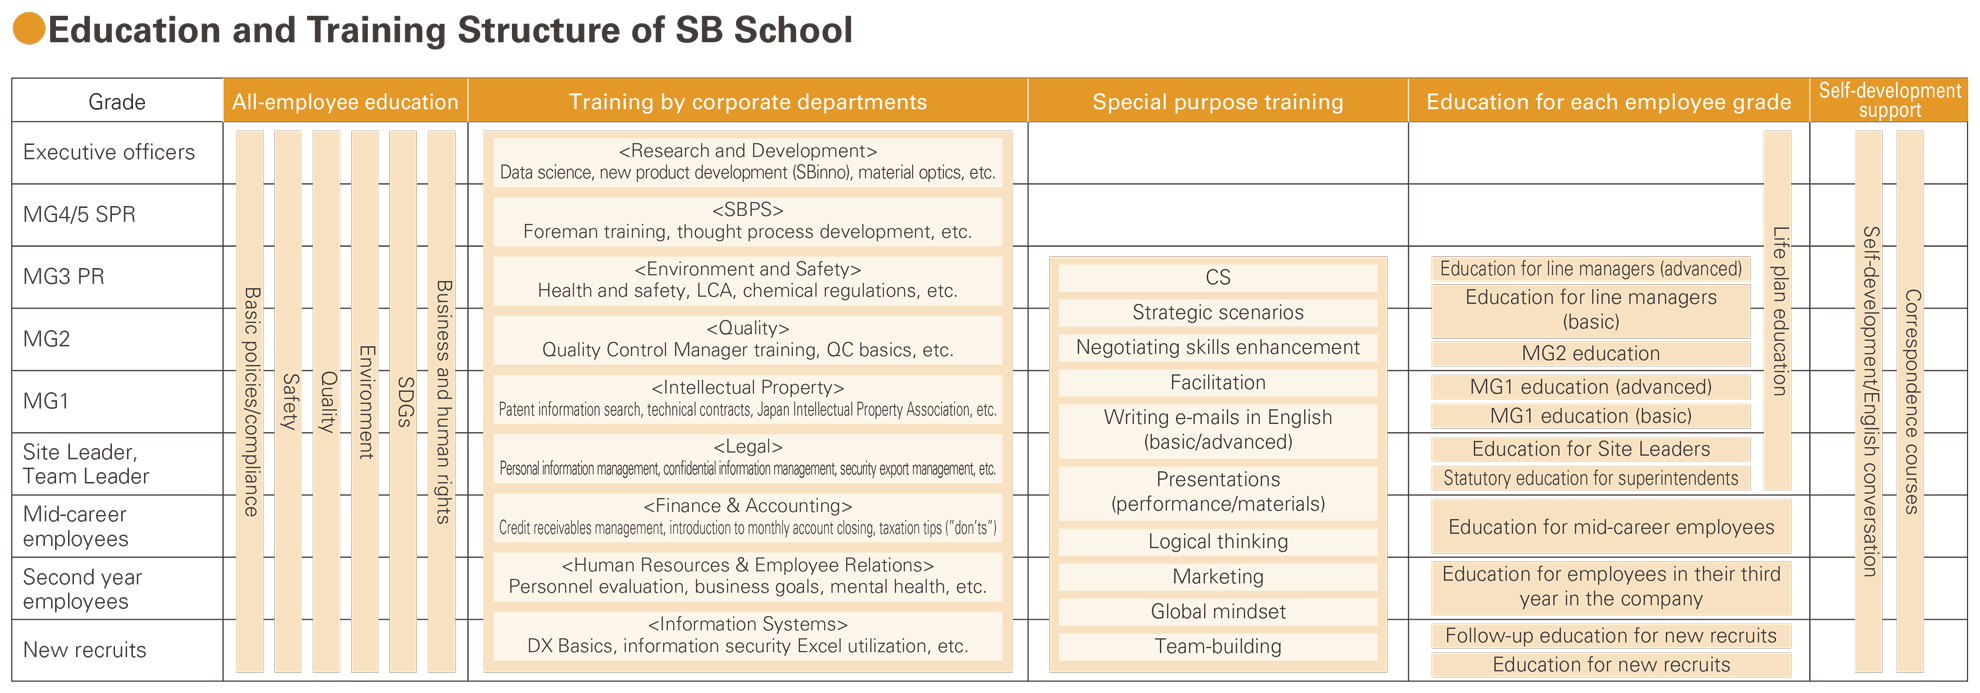 Education and Training Structure of SB School